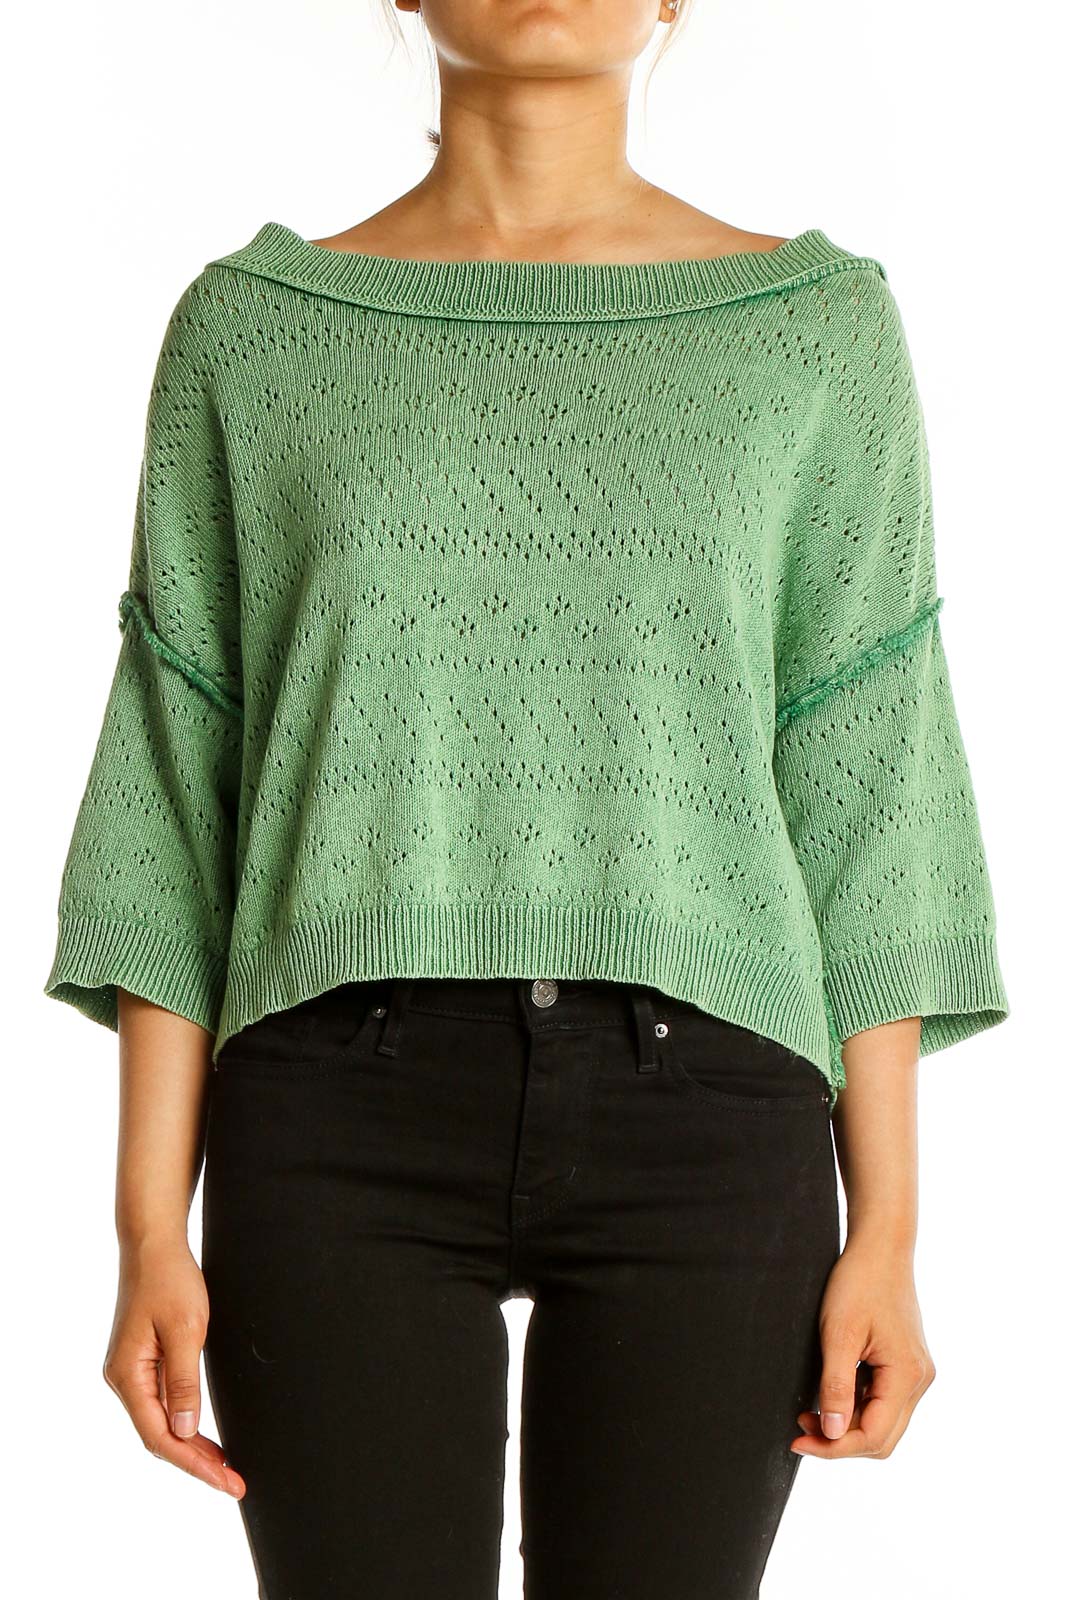 Green Texture Sweater Front